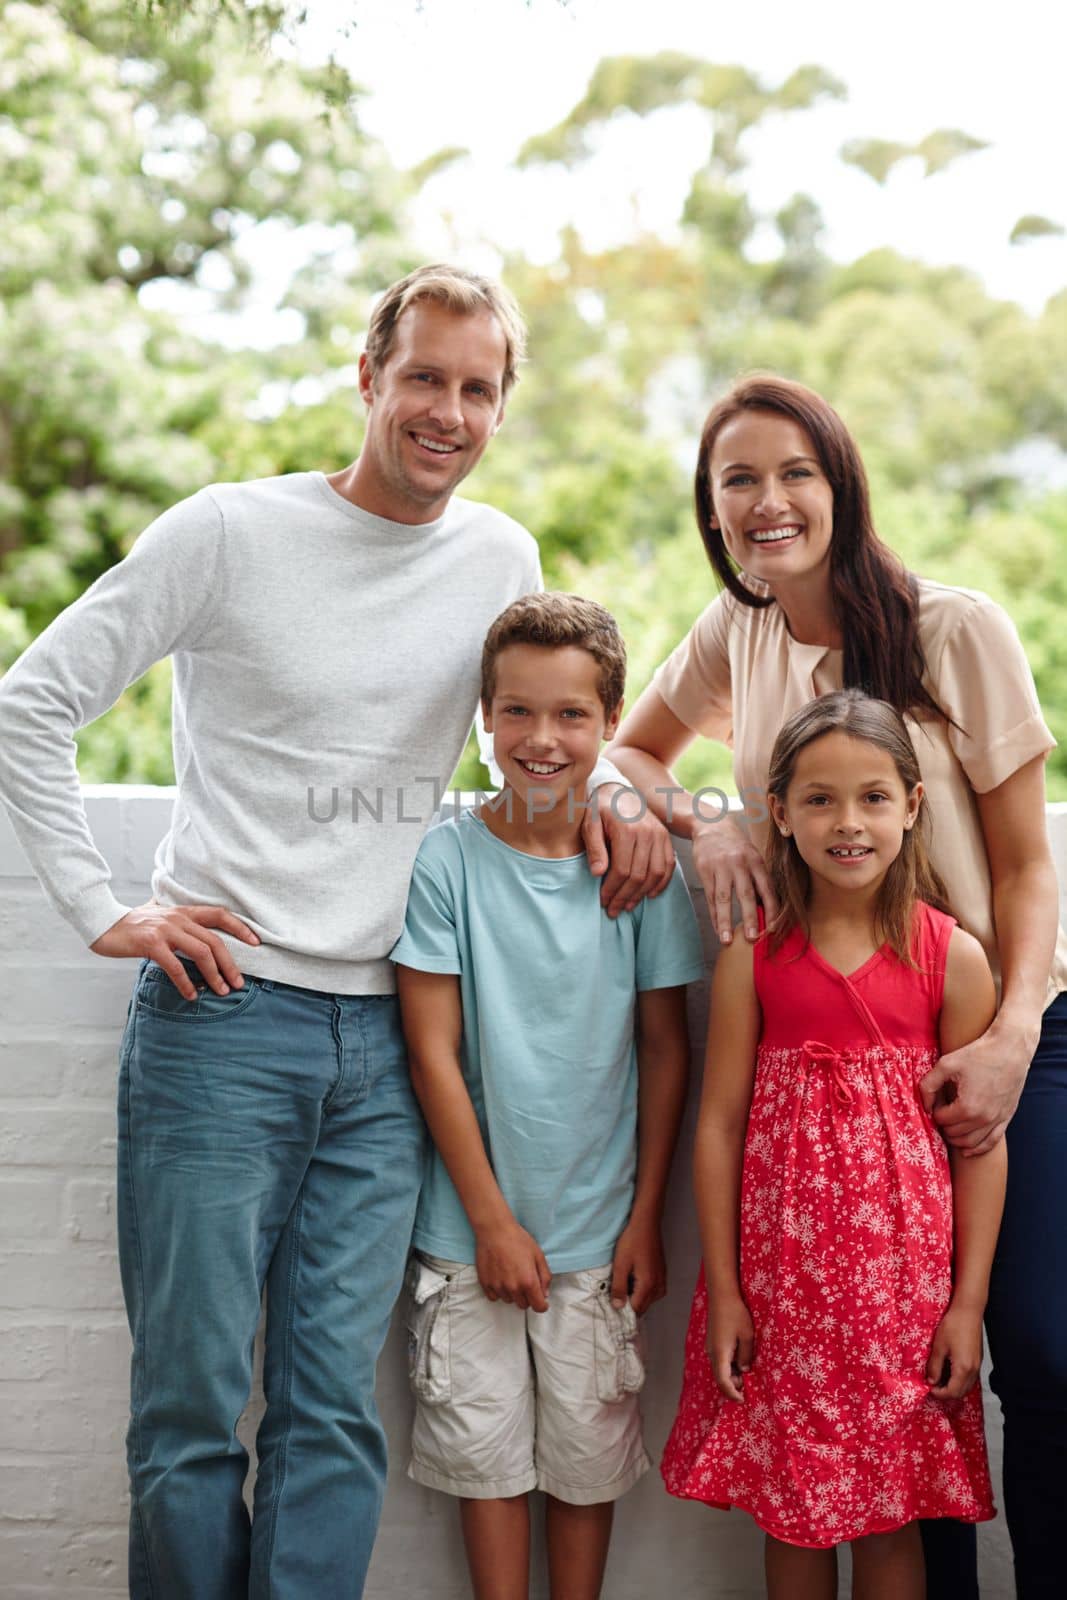 Quality family time. Portrait of a happy family of four standing together outside